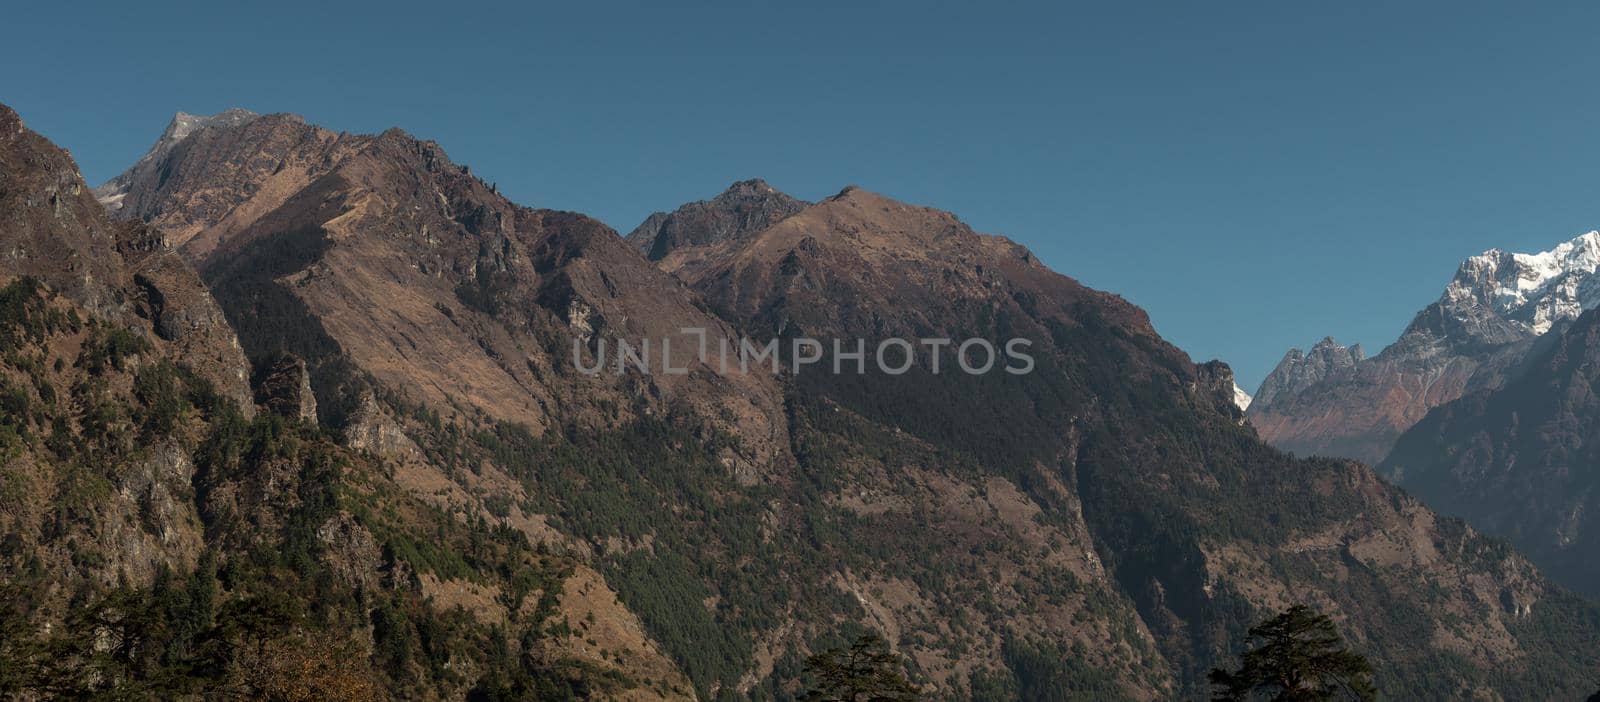 Panorama of nepalese mountain ranges along Annapurna circuit by arvidnorberg